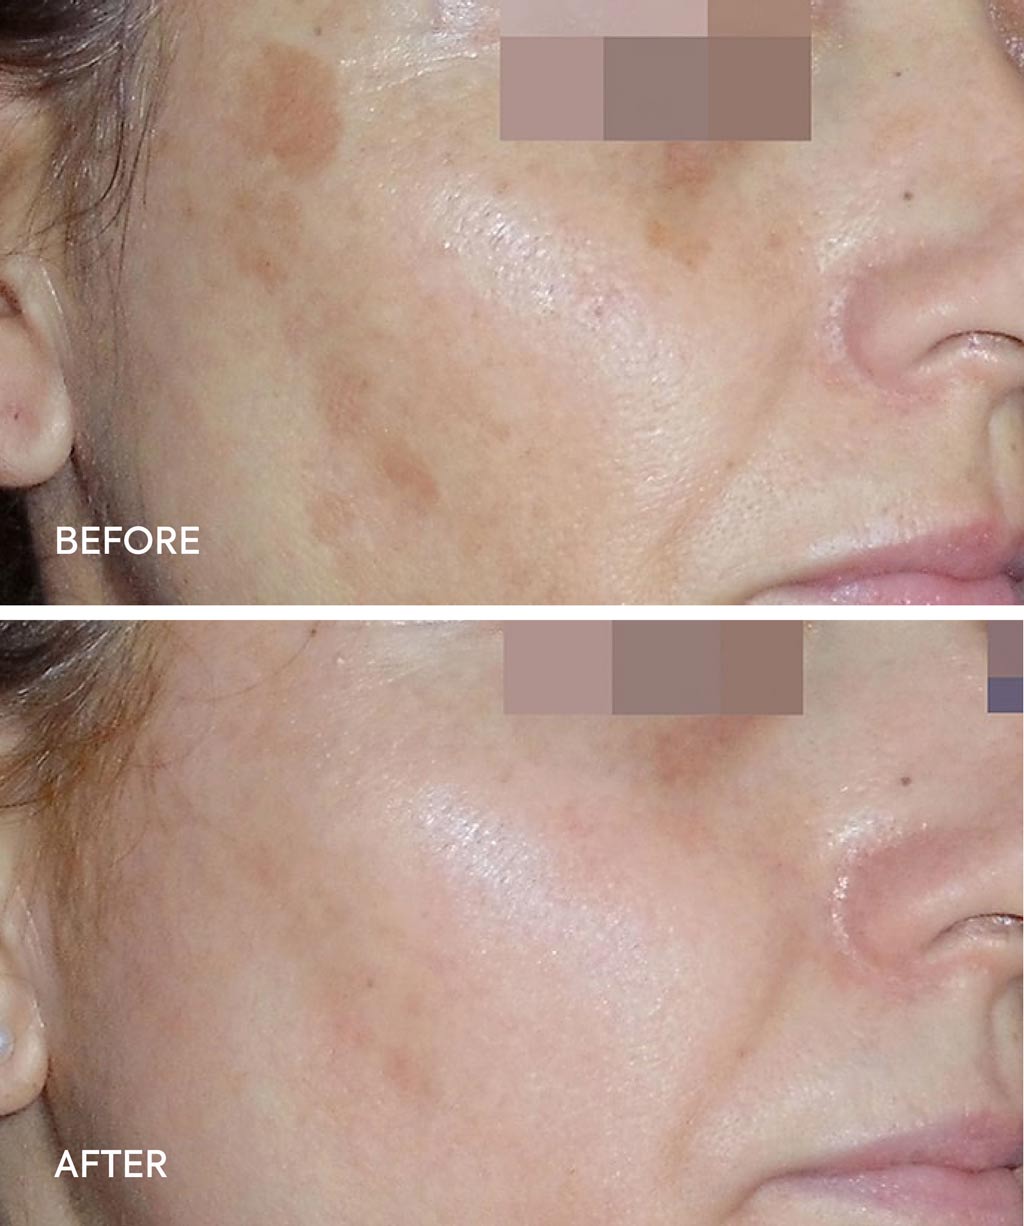 Cosmelan Treatment before and after images - 4